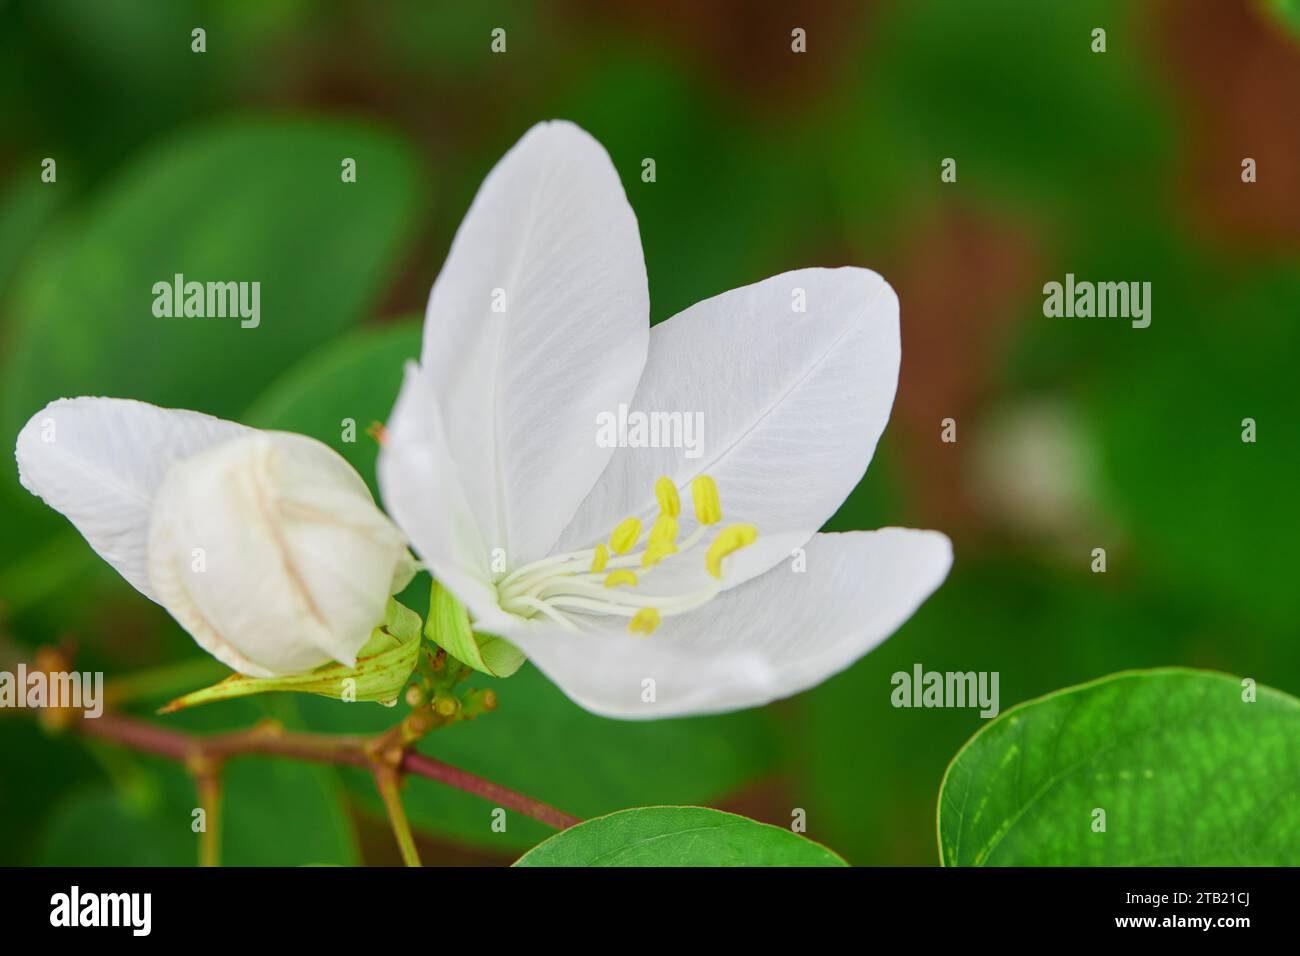 Close-up view of white Bauhinia x blakeana flower in bloom Stock Photo